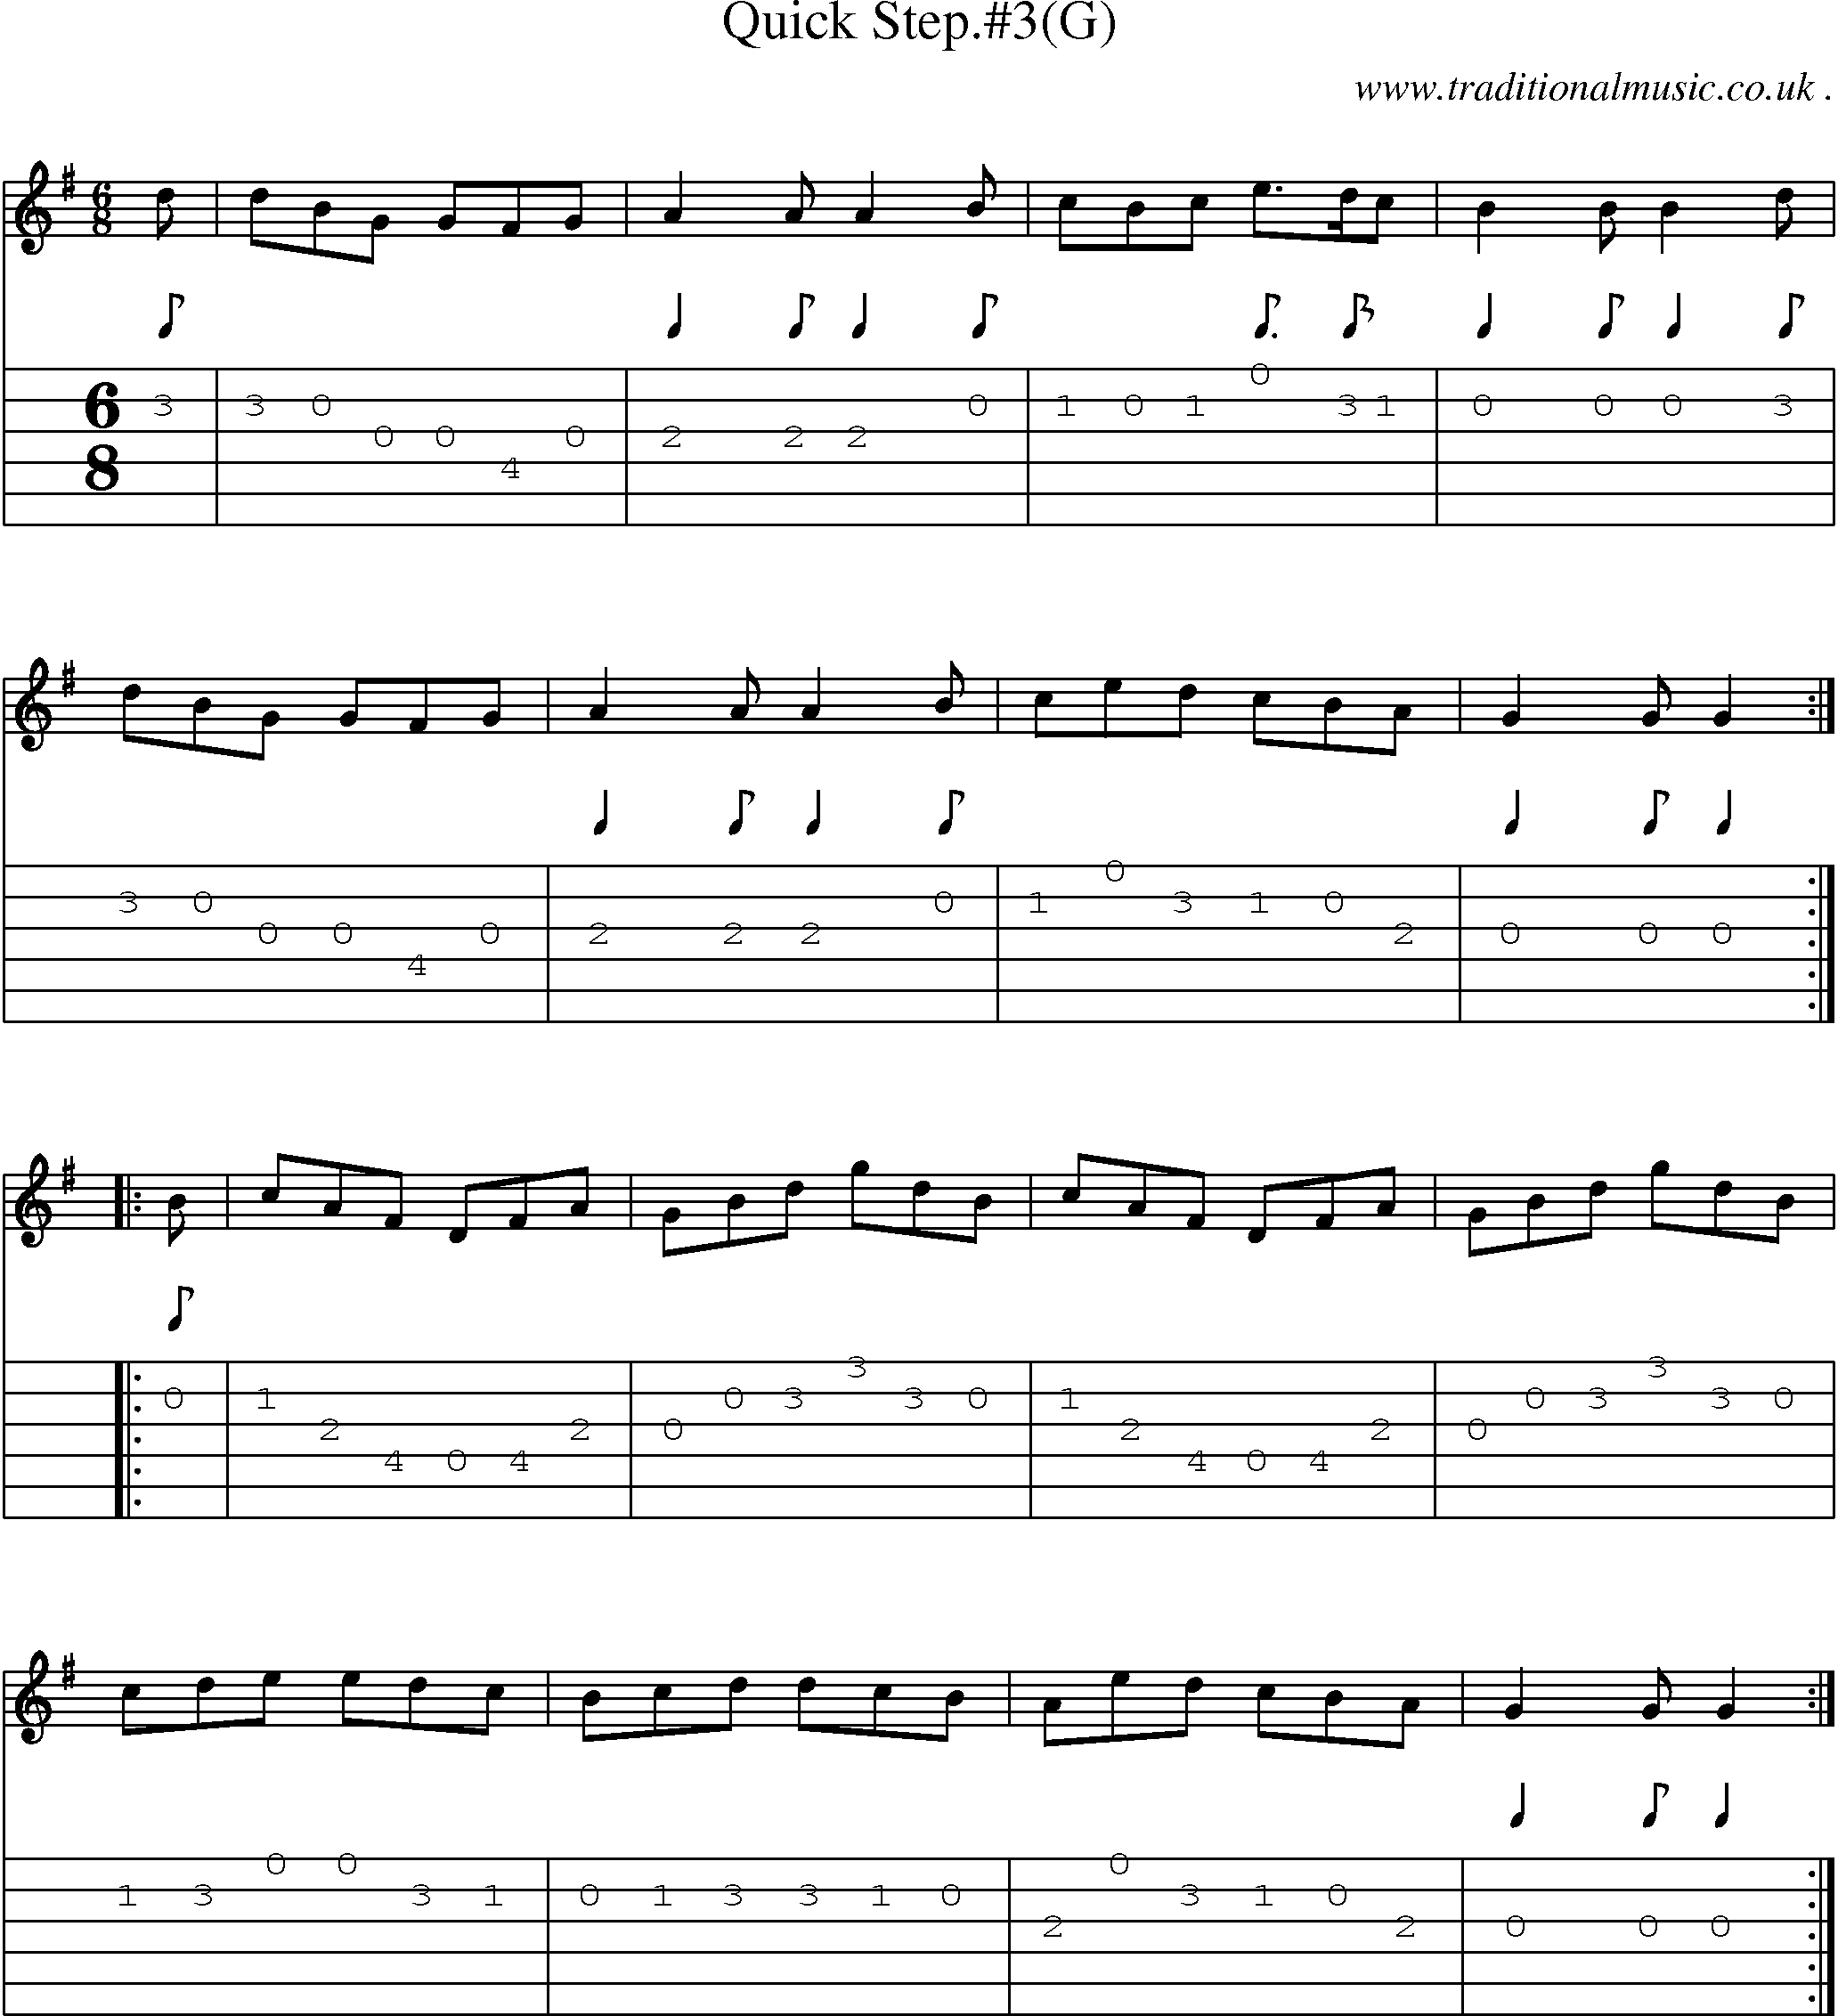 Sheet-Music and Guitar Tabs for Quick Step3(g)